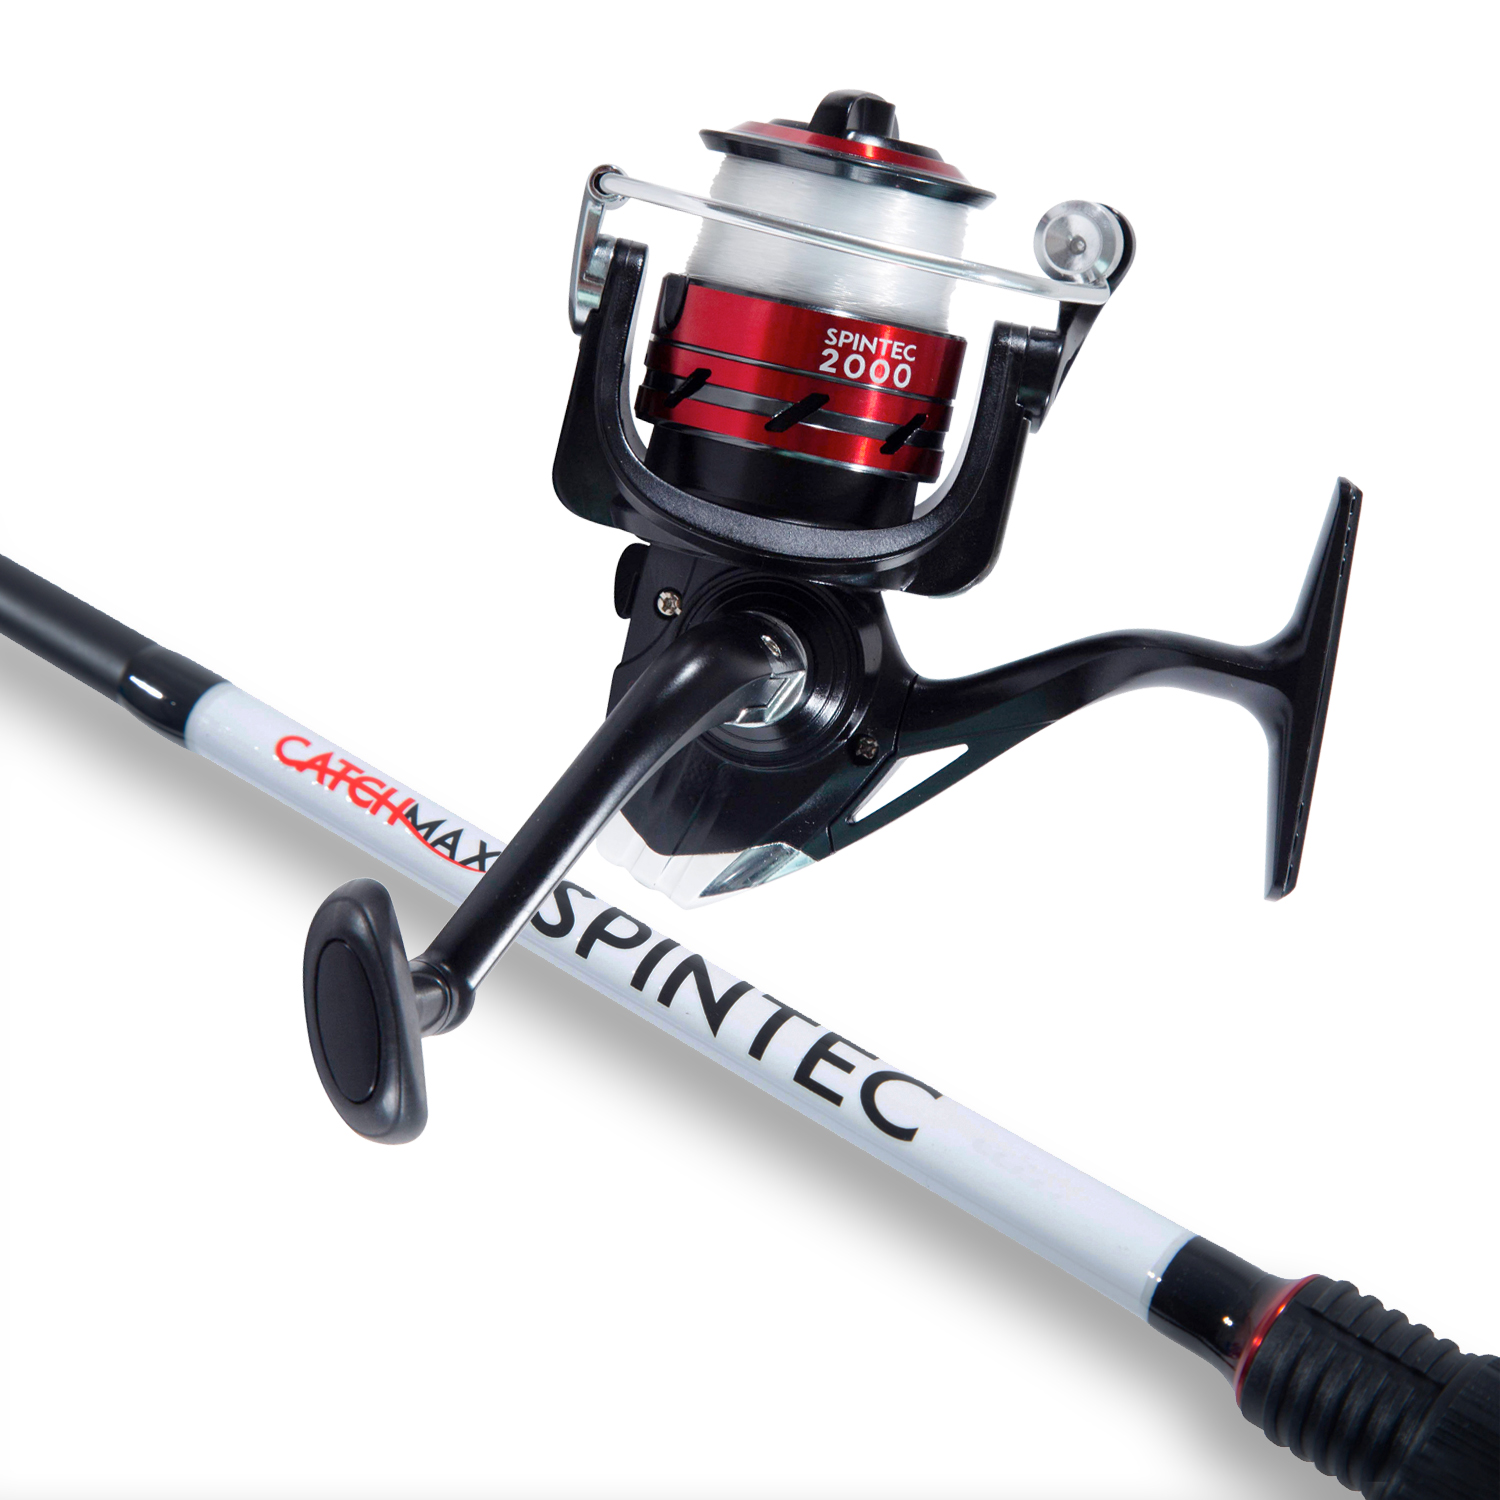 Set Combo Canna Catchmax Spintec